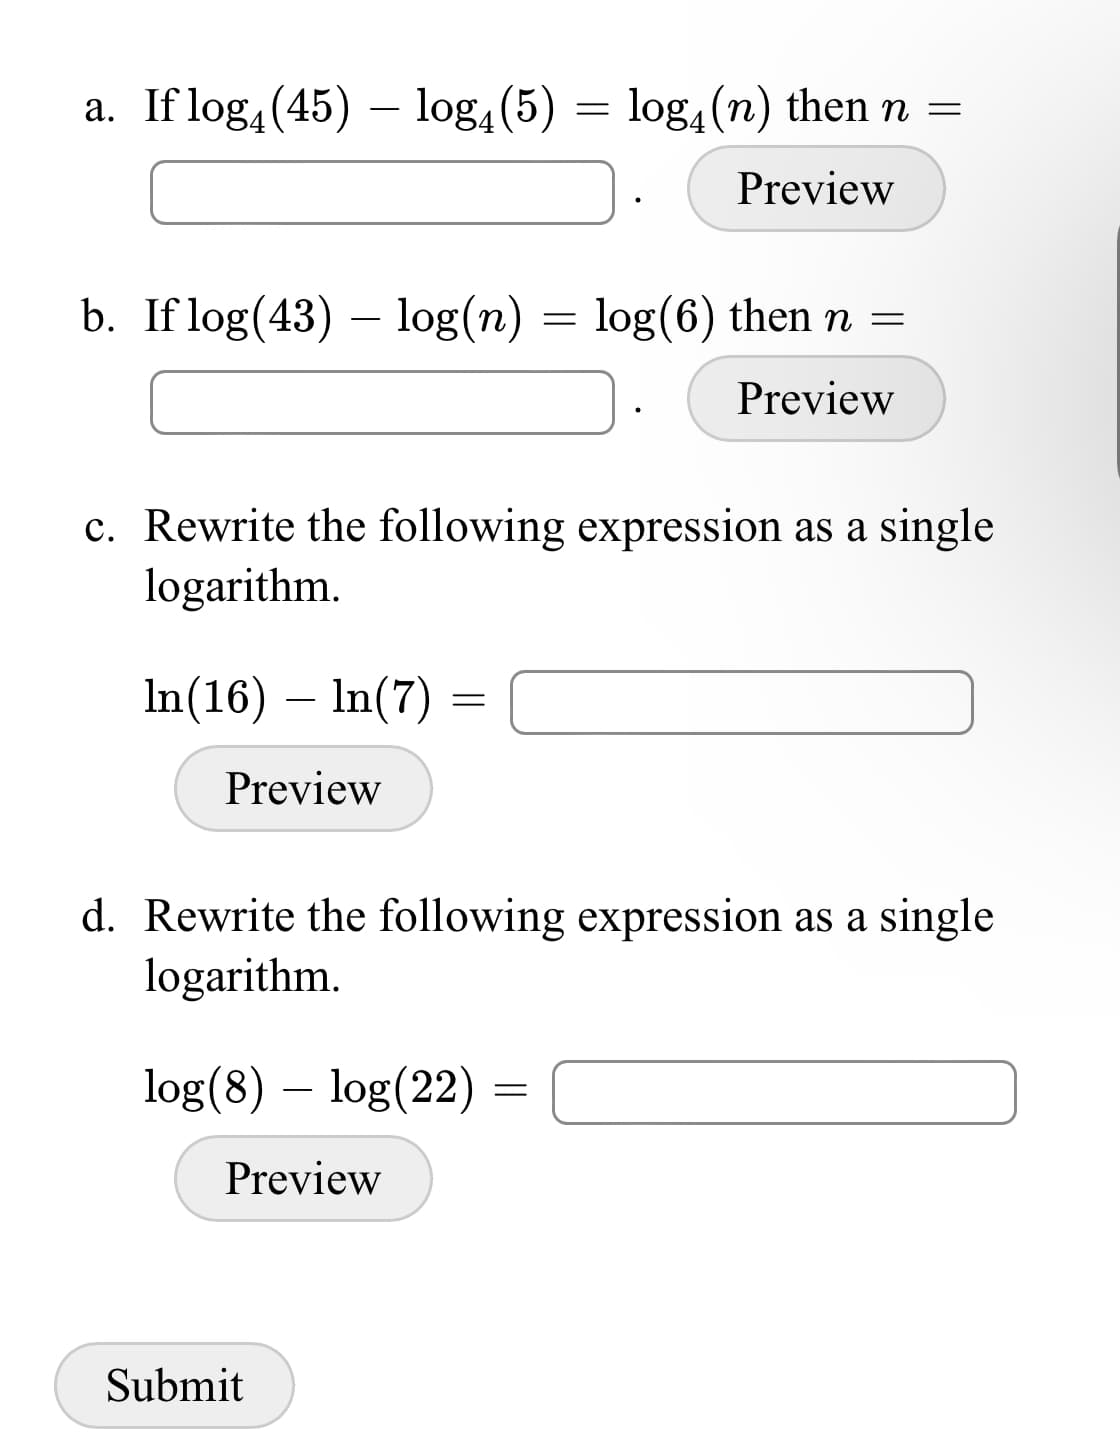 a. If log, (45) – log, (5) = log, (n) then n =
Preview
b. If log(43) – log(n)
= log(6) then n =
Preview
c. Rewrite the following expression as a single
logarithm.
In(16) – In(7) =
Preview
d. Rewrite the following expression as a single
logarithm.
log(8) – log(22)
Preview
Submit
